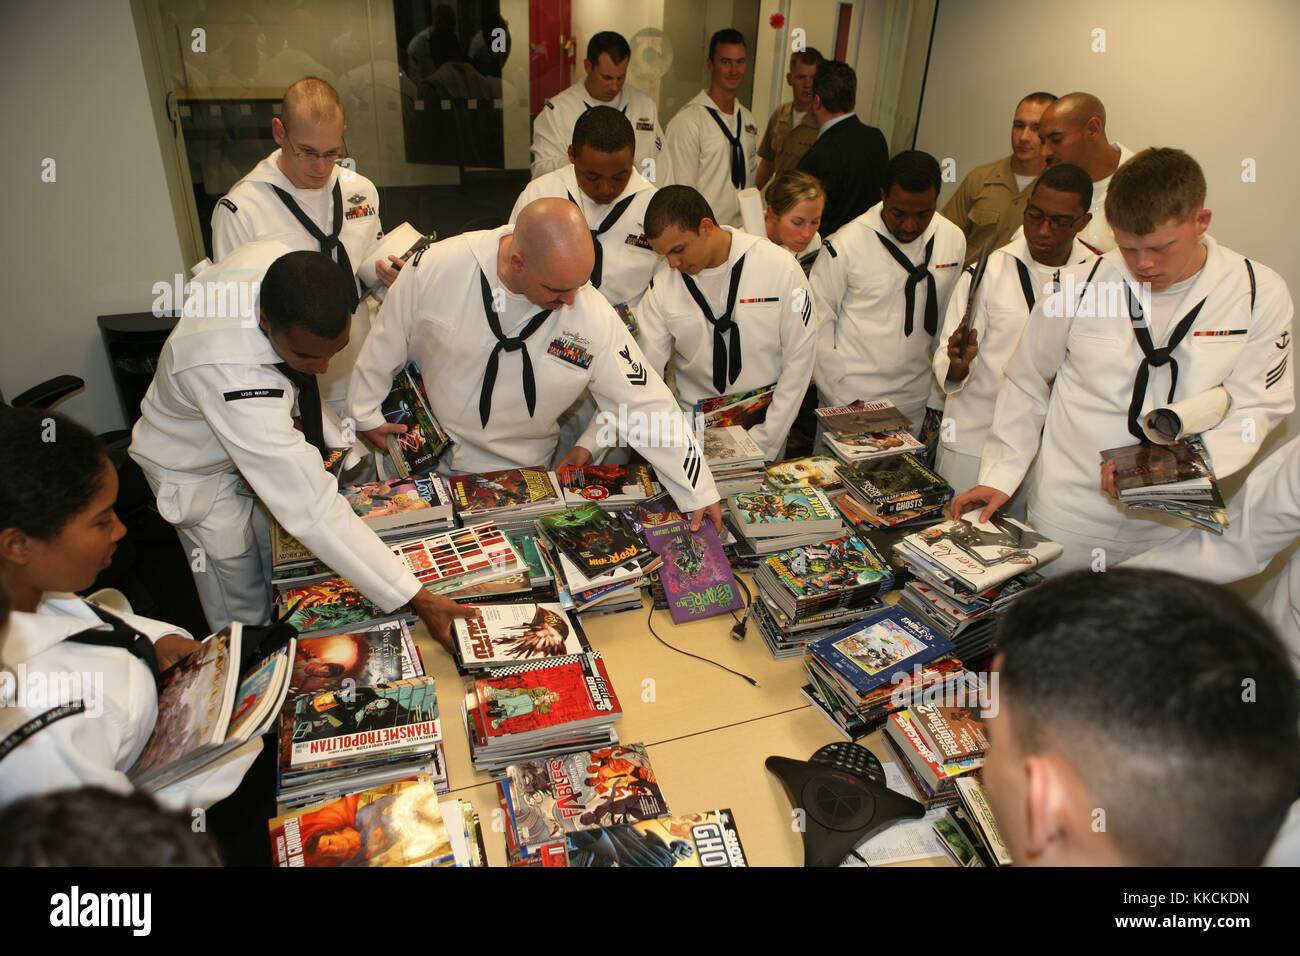 Sailors and Marines look through comic books during a tour of the DC Comics facility during Fleet Week New York 2012, New York. Image courtesy Mass Communication Specialist 1st Class David P. Coleman/US Navy. 2012. Stock Photo